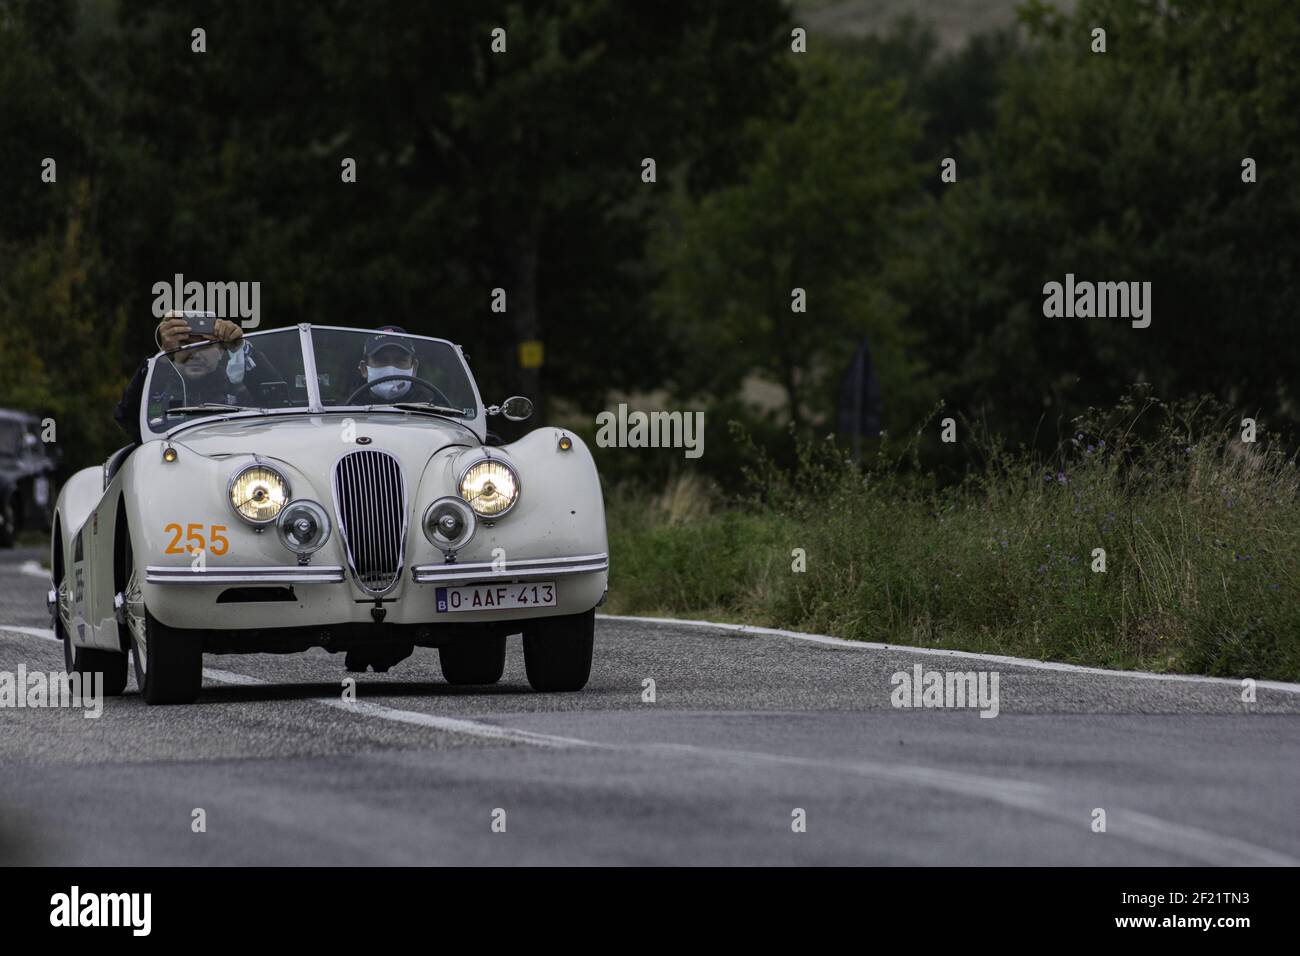 CAGLI, ITALY - Oct 22, 2020: CAGLI , ITALY - OTT 24 - 2020 : JAGUAR XK 120 SE OTS 1954 on an old racing car in rally Mille Miglia 2020 the famous ital Stock Photo